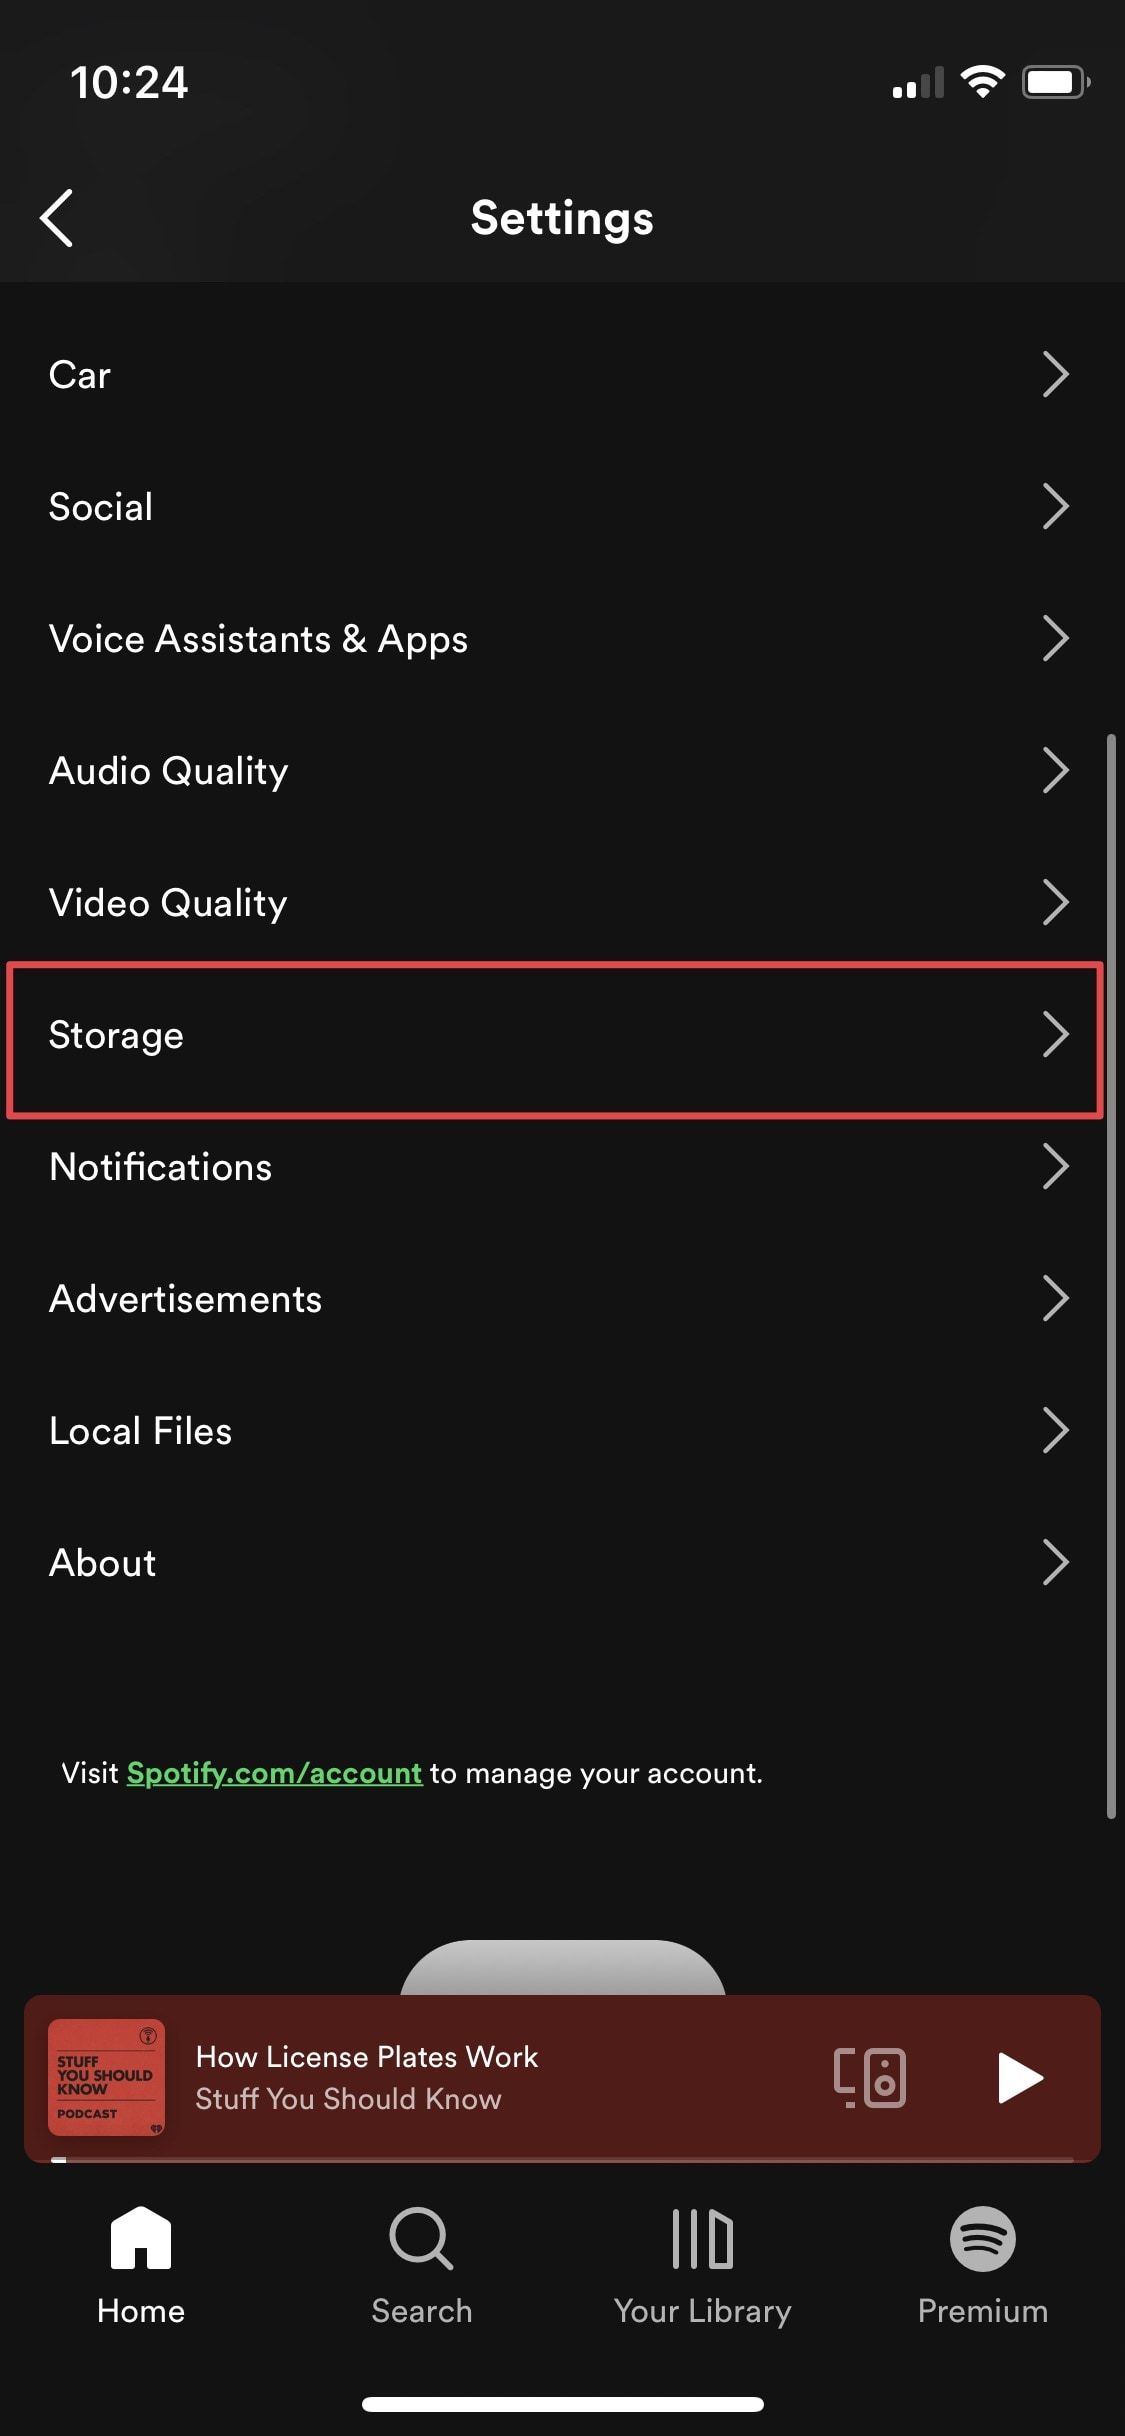 Spotify iPhone app settings page showing storage option